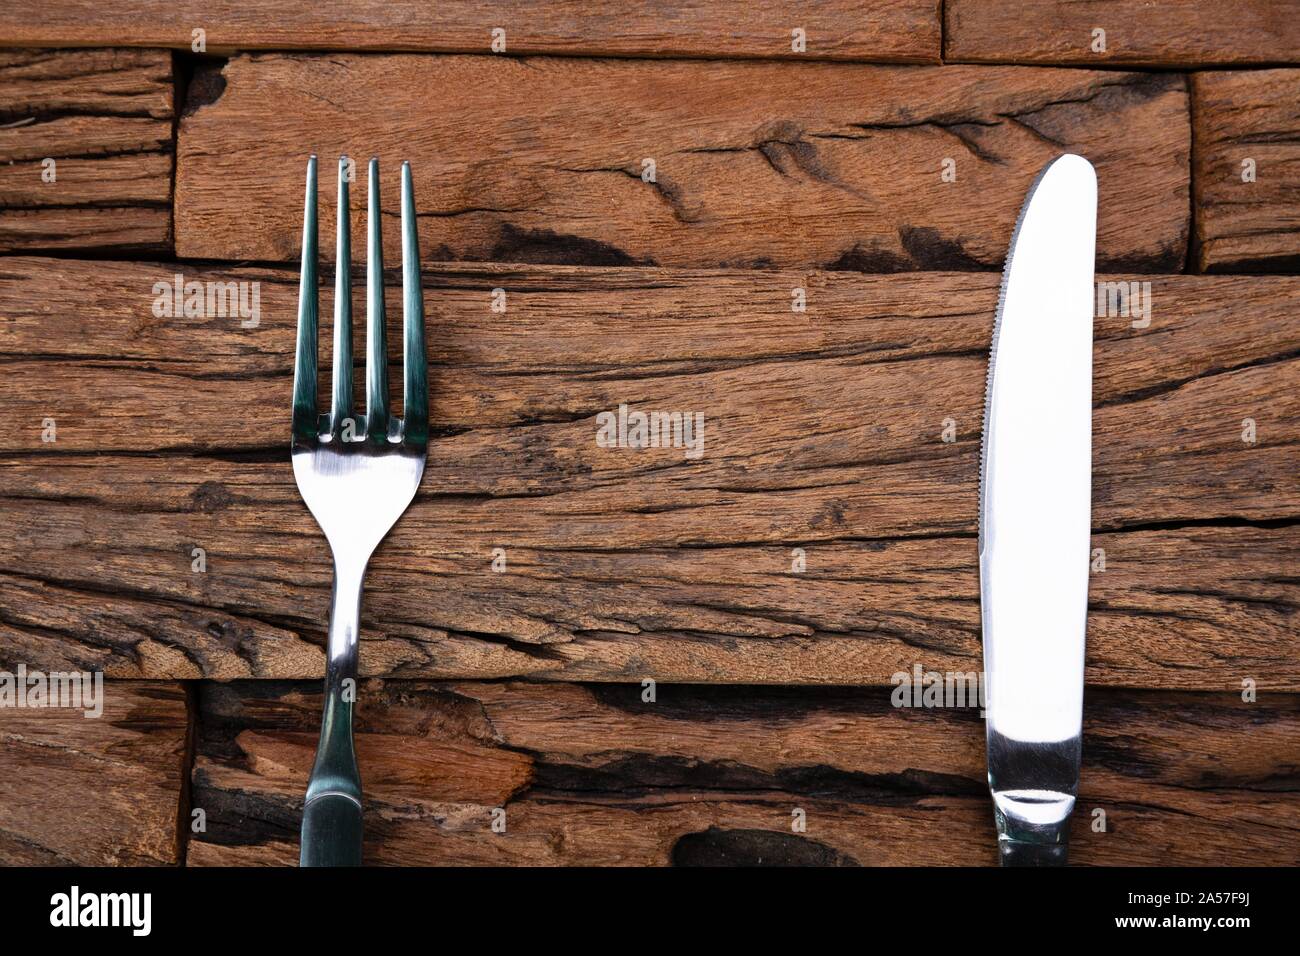 Empty Space Between Fork And Knife On Wooden Table Stock Photo